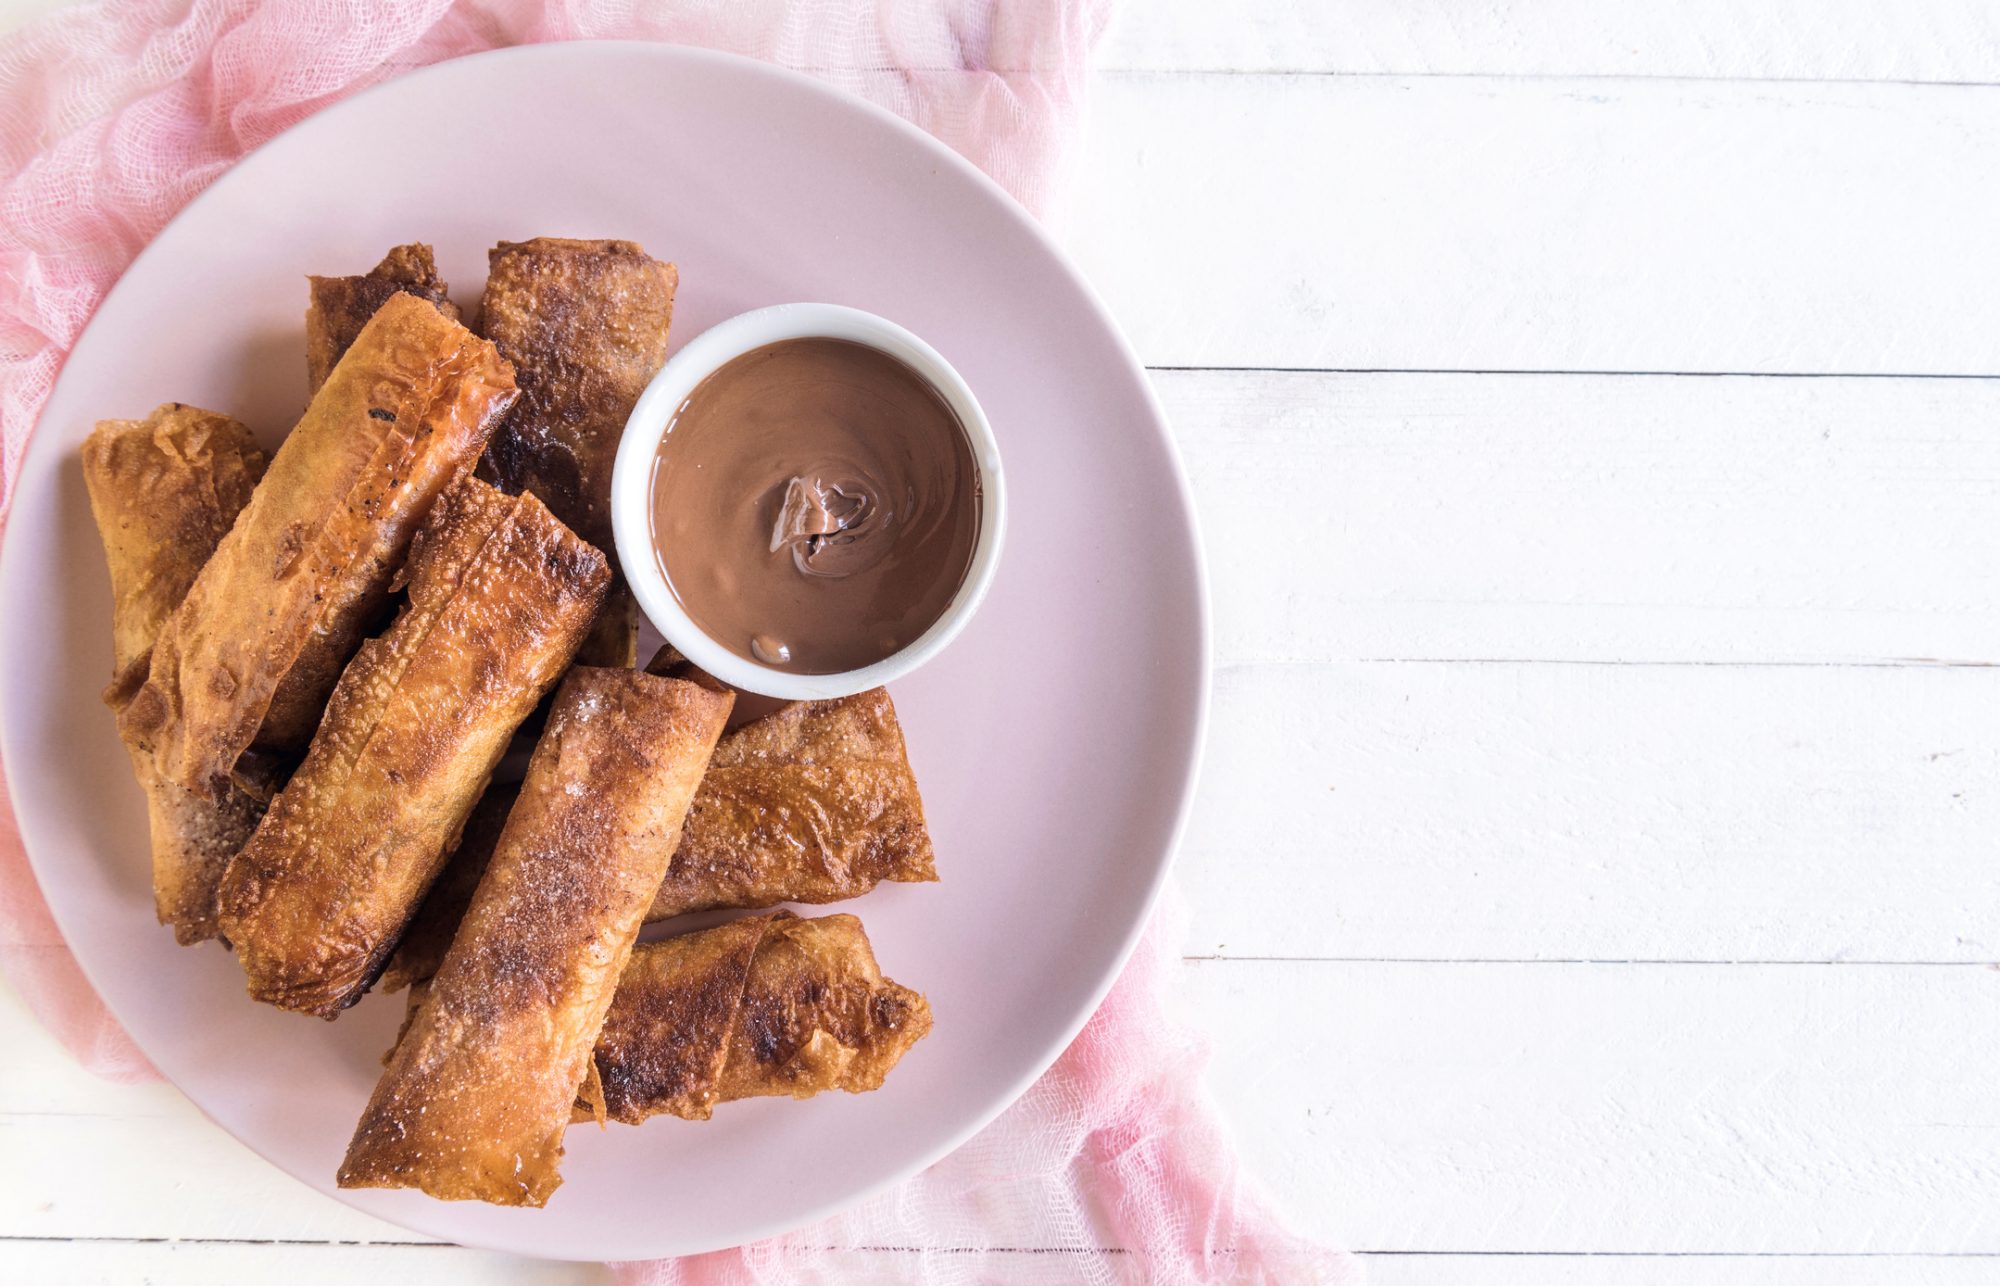 Costco's Apple Pie Spring Rolls Are the Fall Treat We Want   MyRecipes